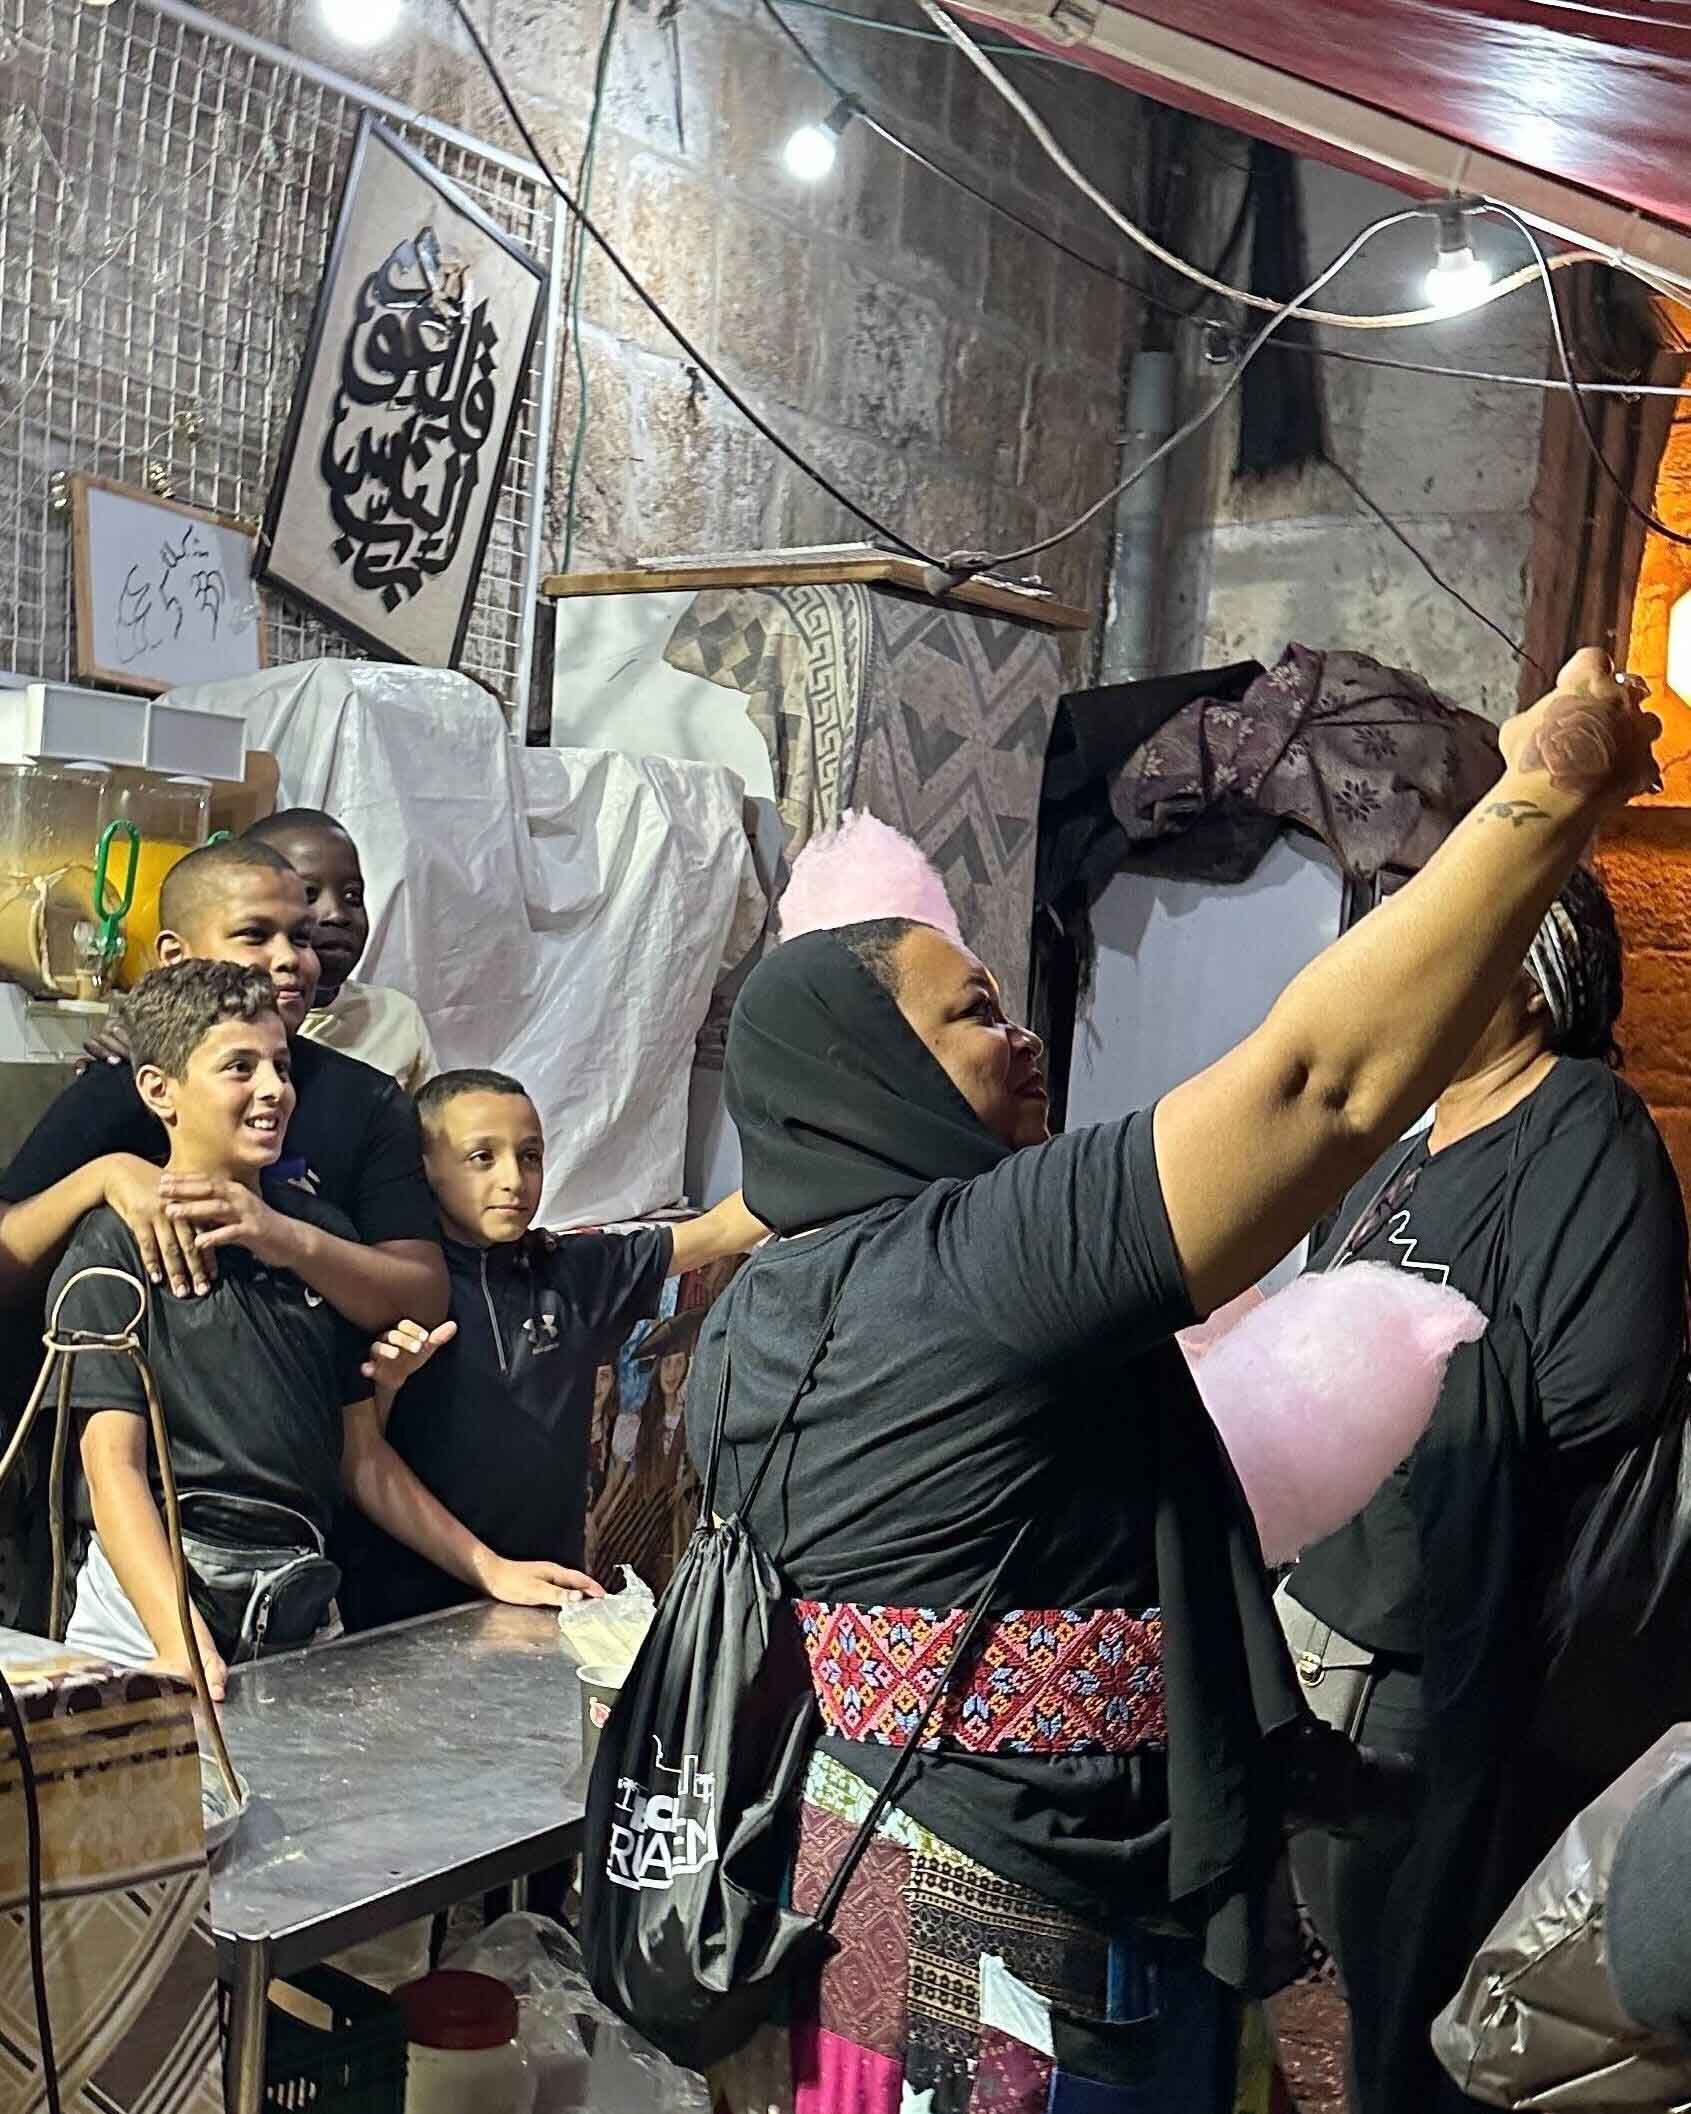 A photo of a joyful woman holding up her phone, capturing a selfie moment with a group of smiling Palestinian kids in the background.